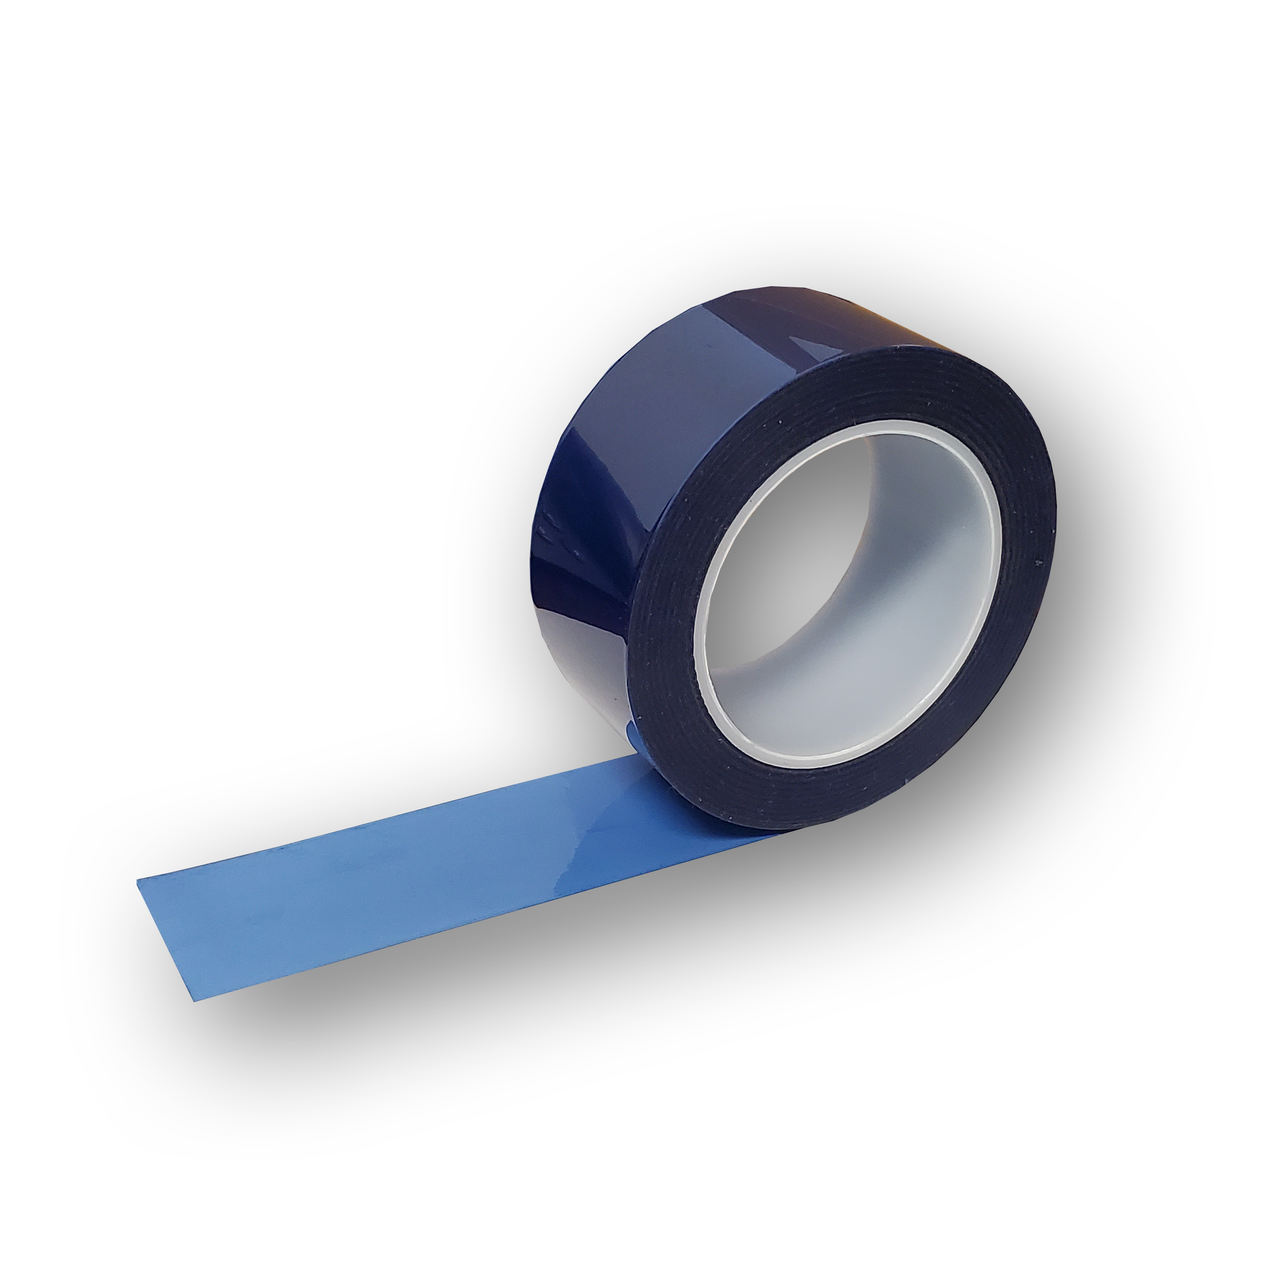 00051115647307, 3M Polyester Tape 8991, Blue, 1 in x 72 yd, 2.4 mil, 36  rolls per case, Aircraft products, polyester-tapes